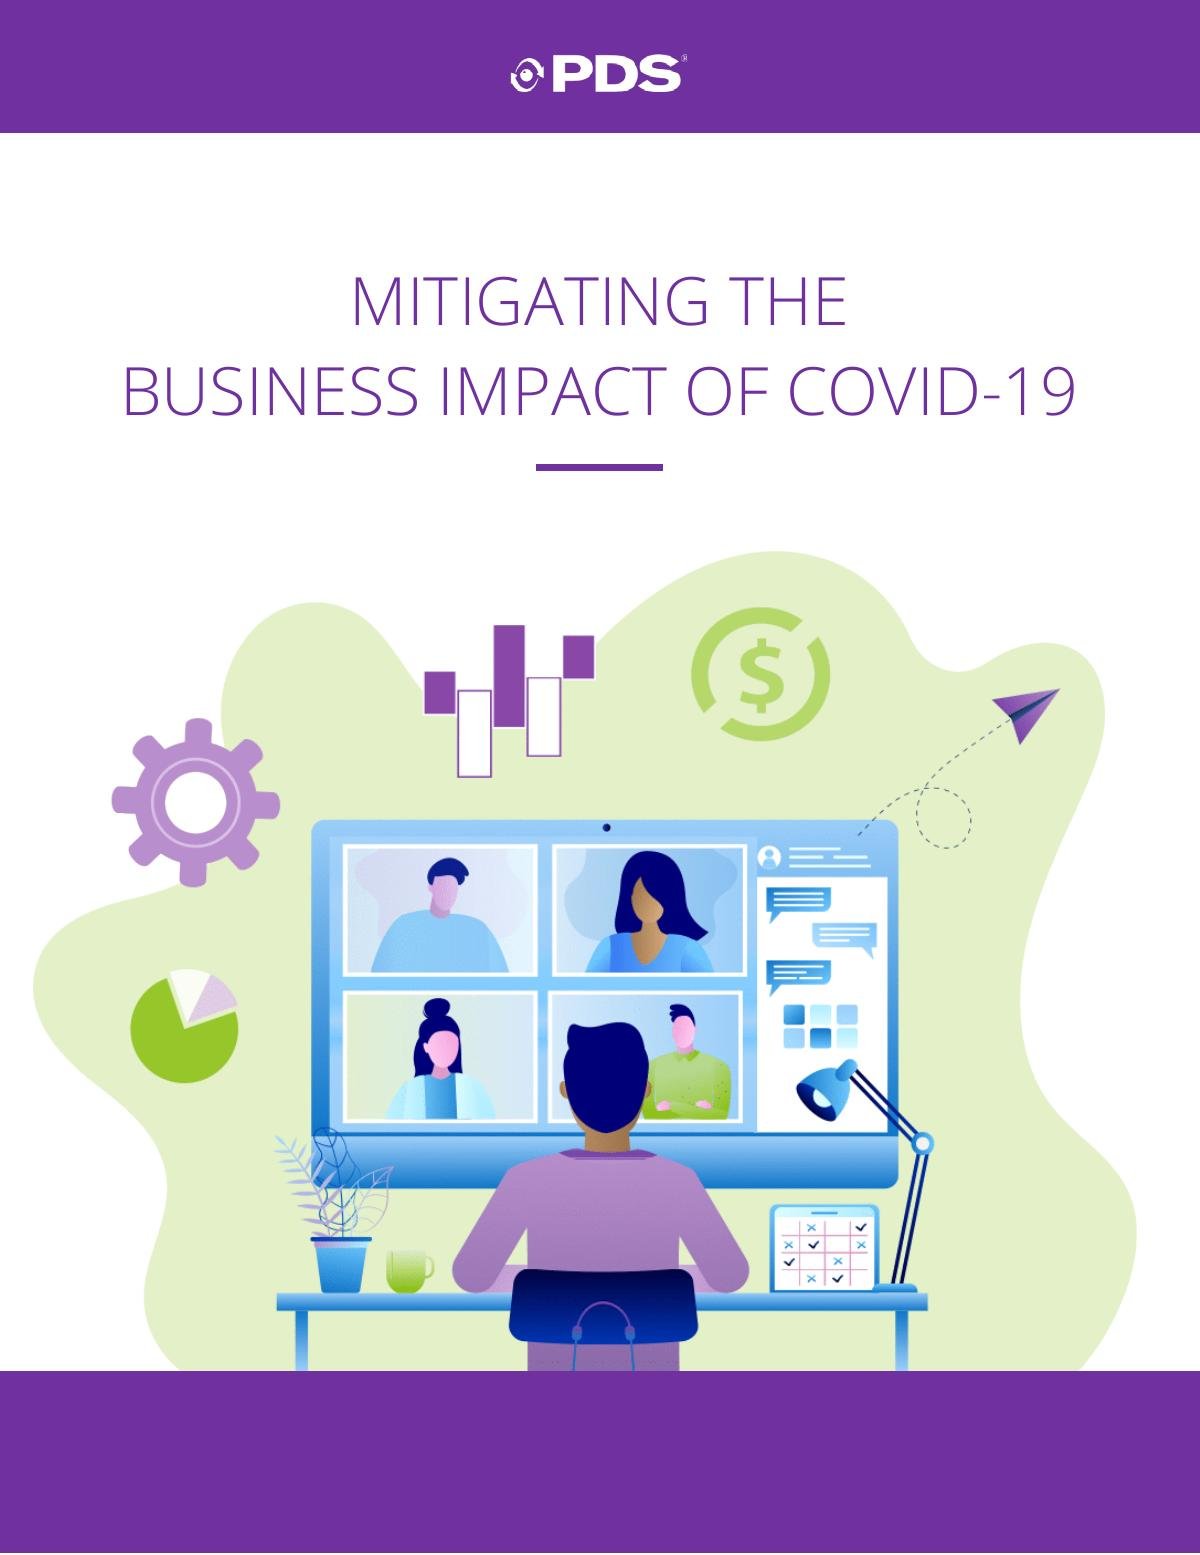 Mitigating the Business Impact of COVID-19